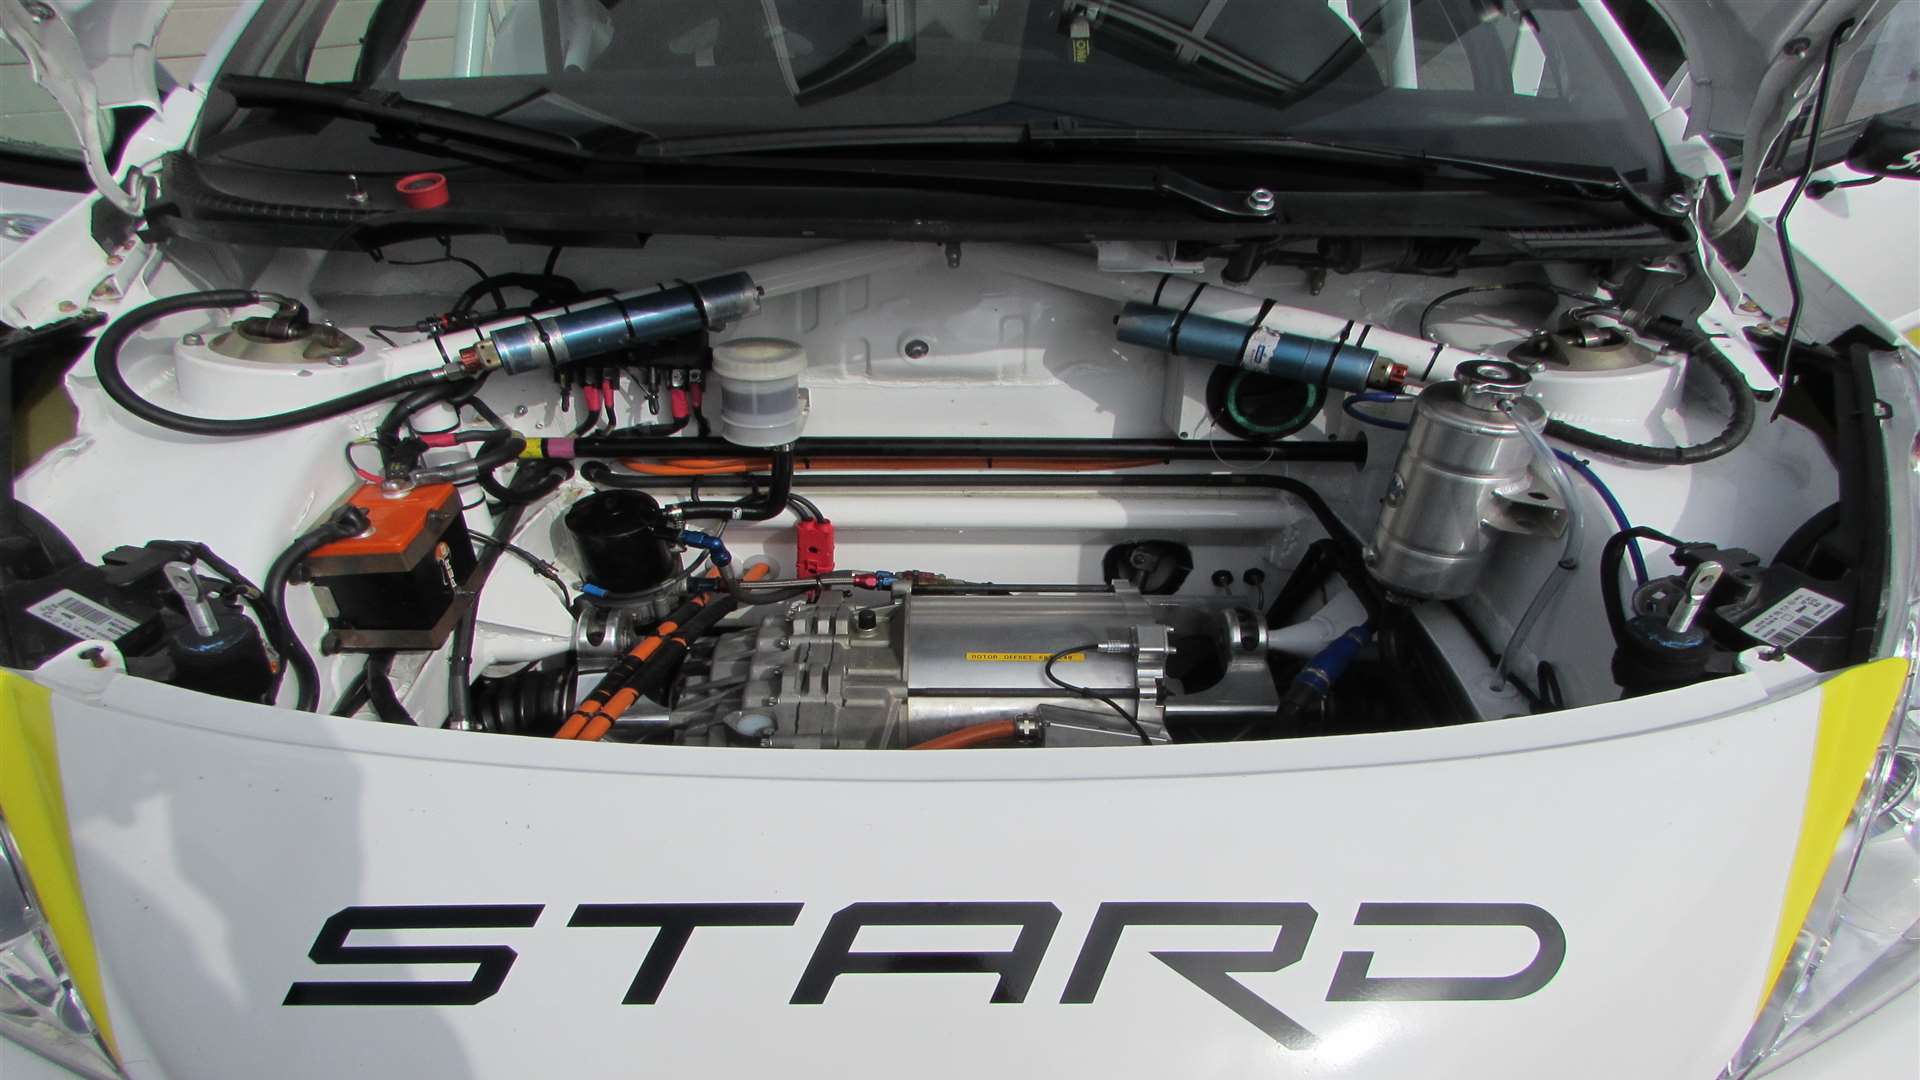 The STARD car was revealed last year